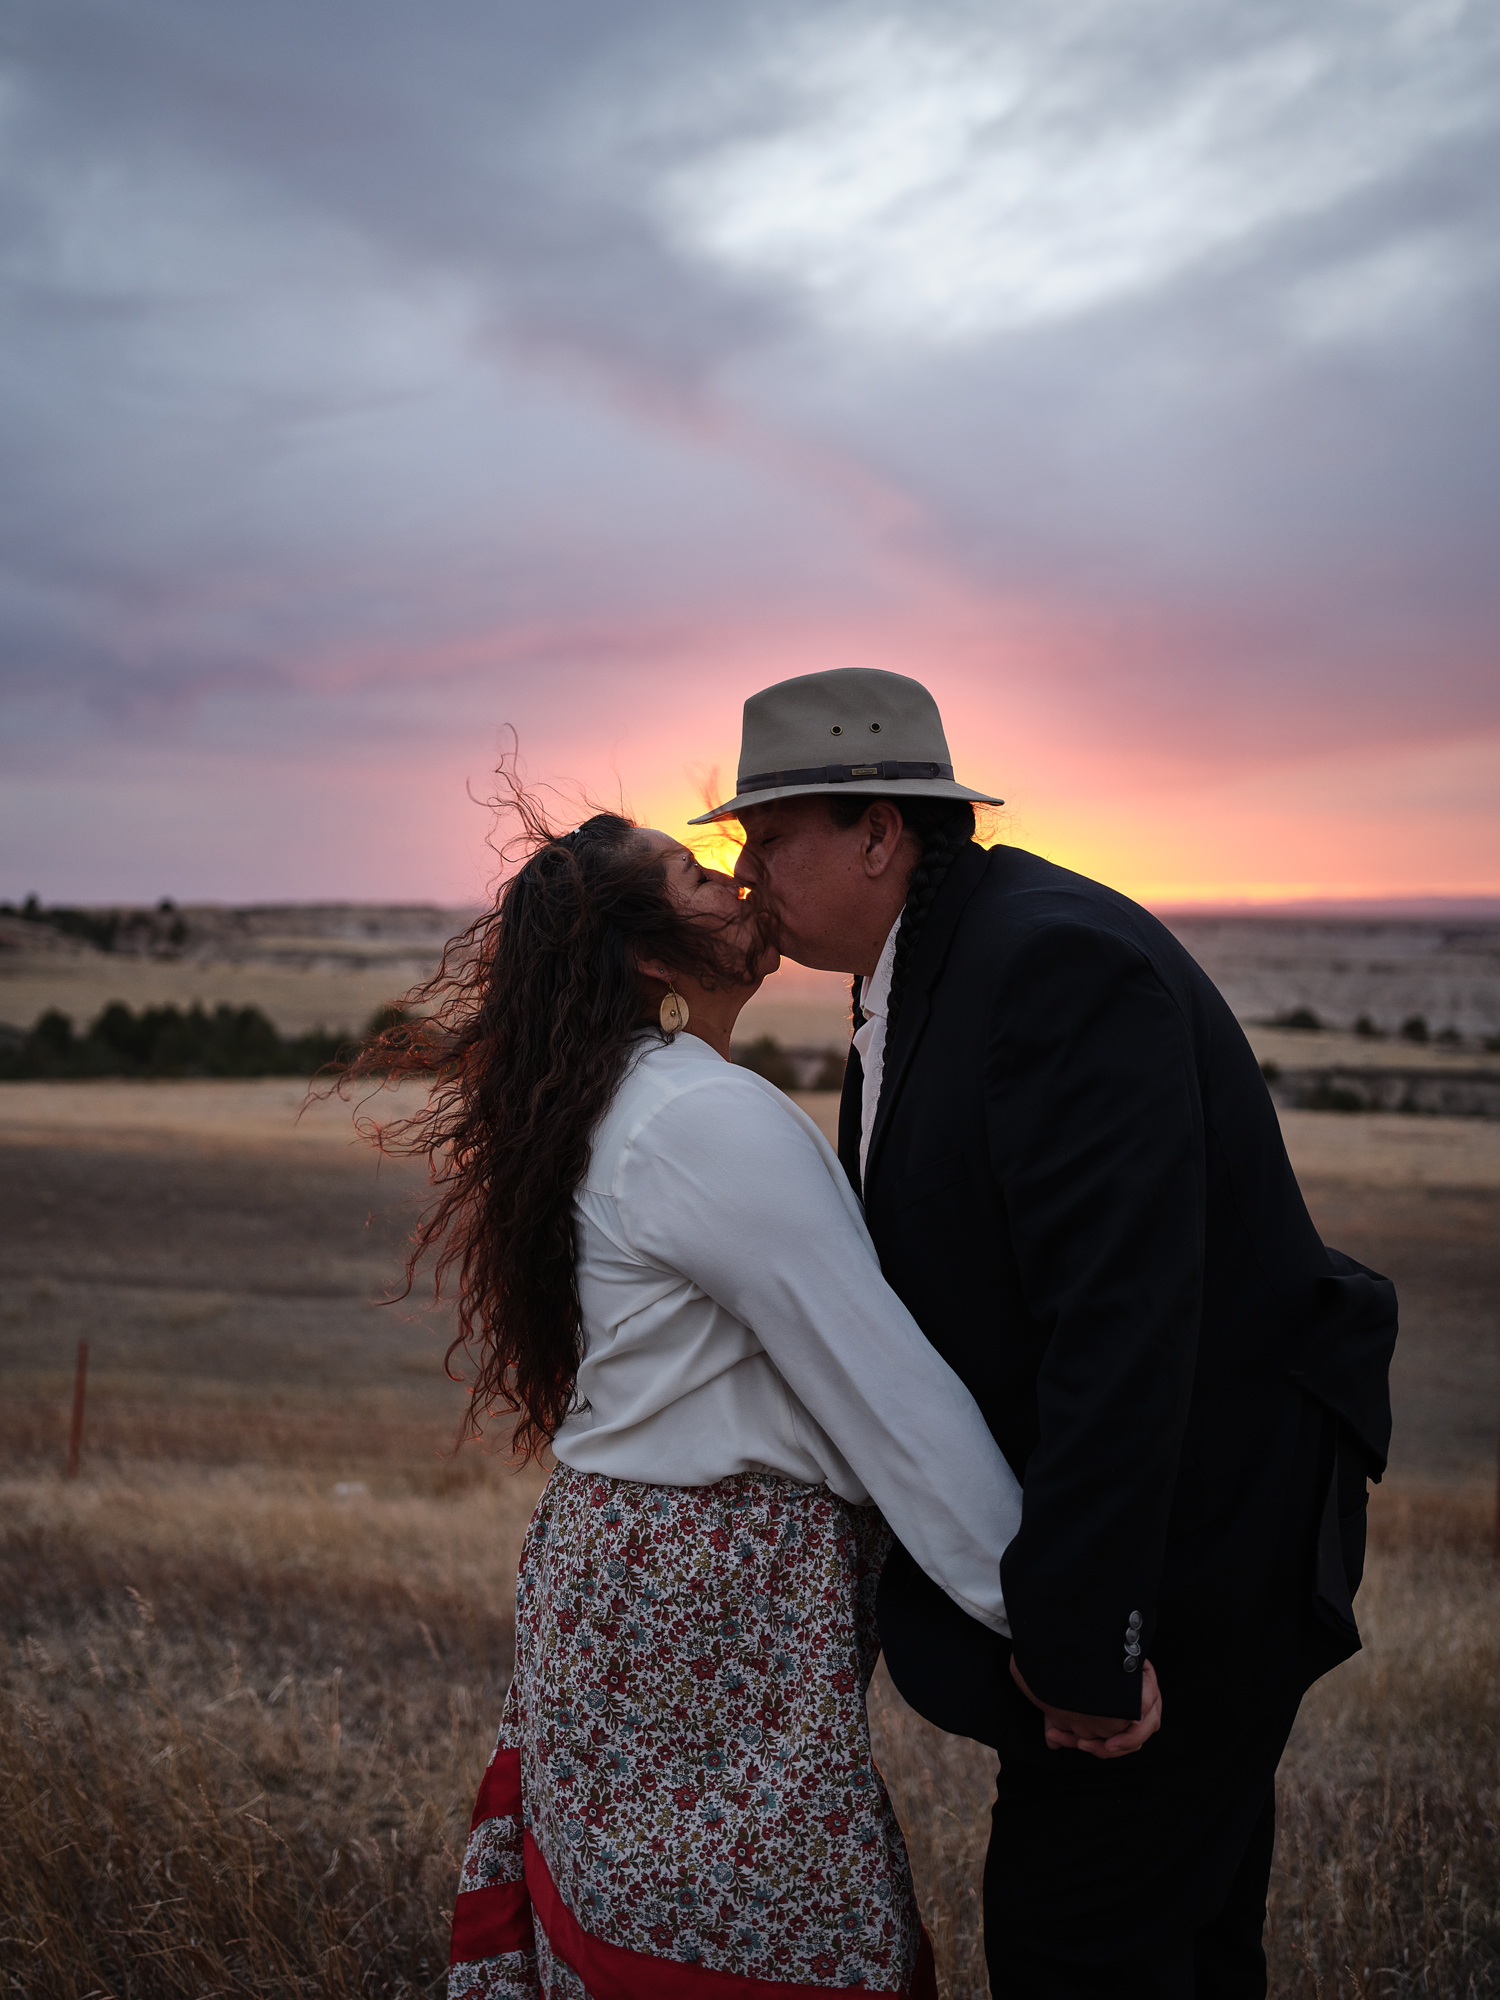 A Native American couple kiss amidst the setting sun of Badlands national park